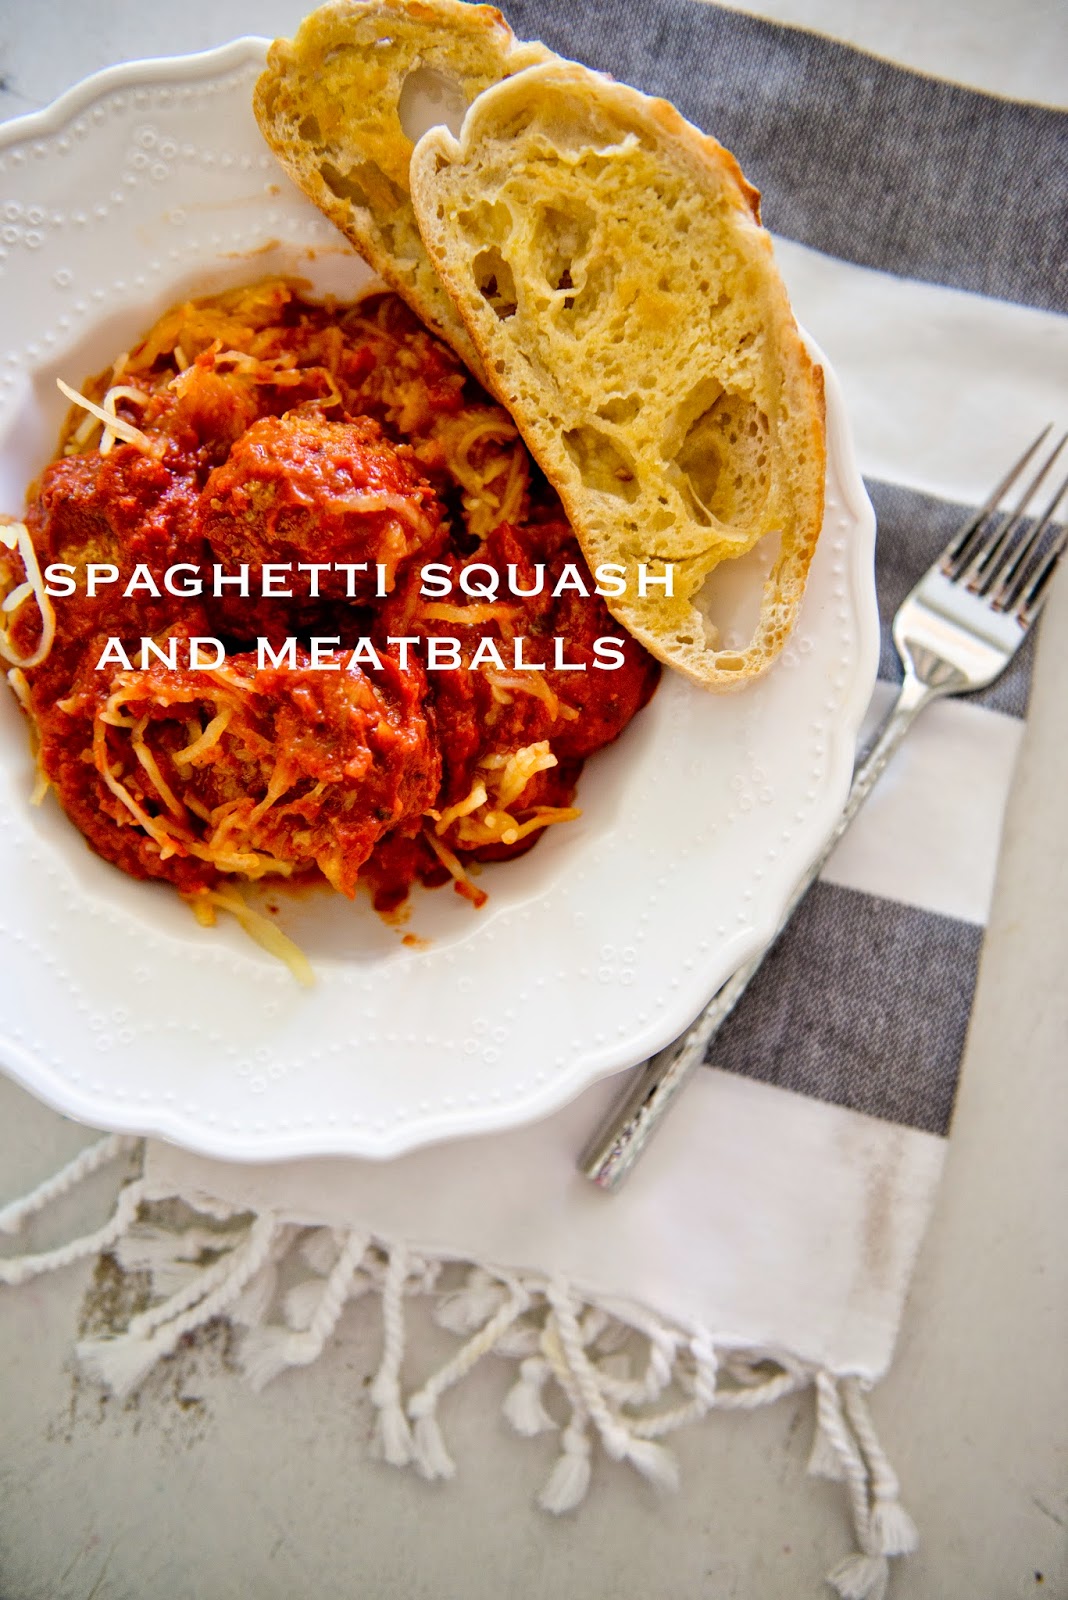 Spaghetti Squash Spaghetti and Meatballs Recipe--using spaghetti squash instead of spaghetti for a healthy spin on this popular comfort food.